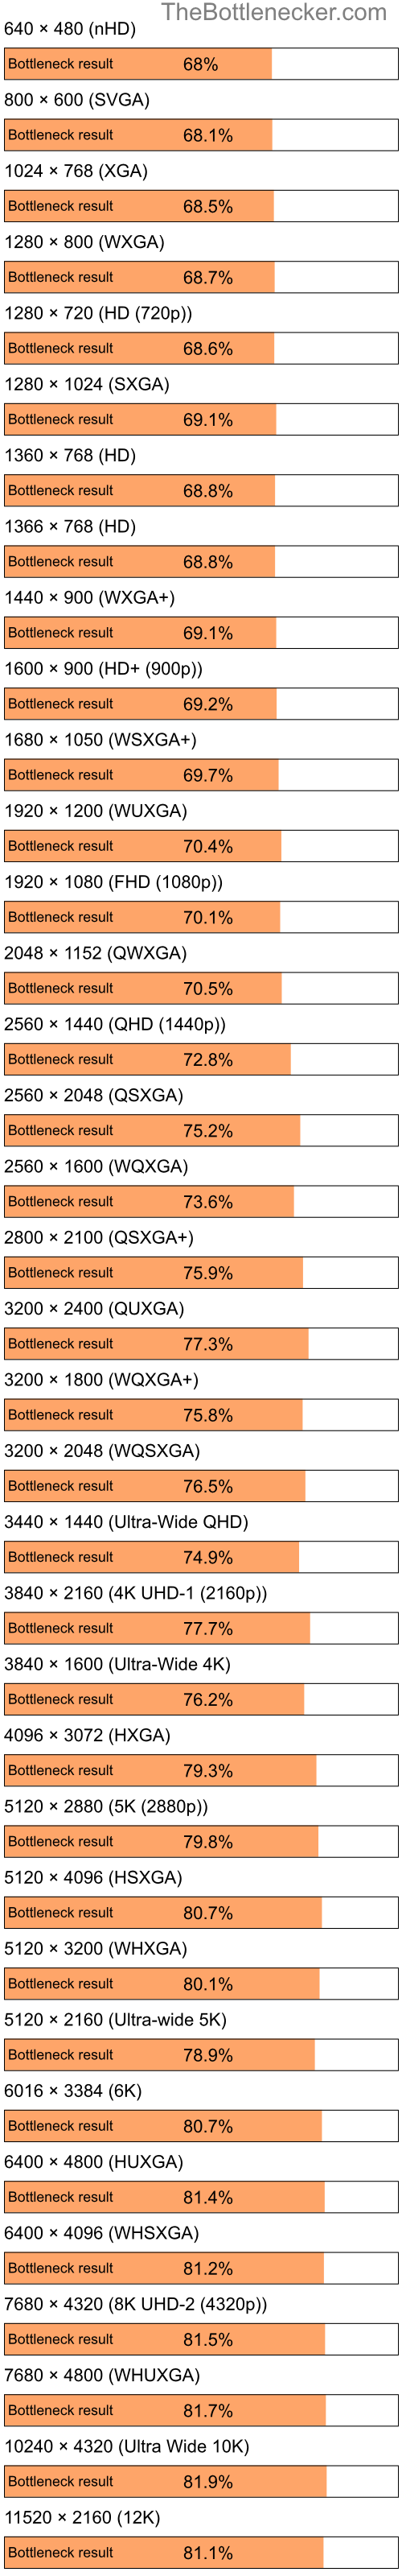 Bottleneck results by resolution for Intel Pentium 4 and NVIDIA GeForce 7500 LE in Graphic Card Intense Tasks